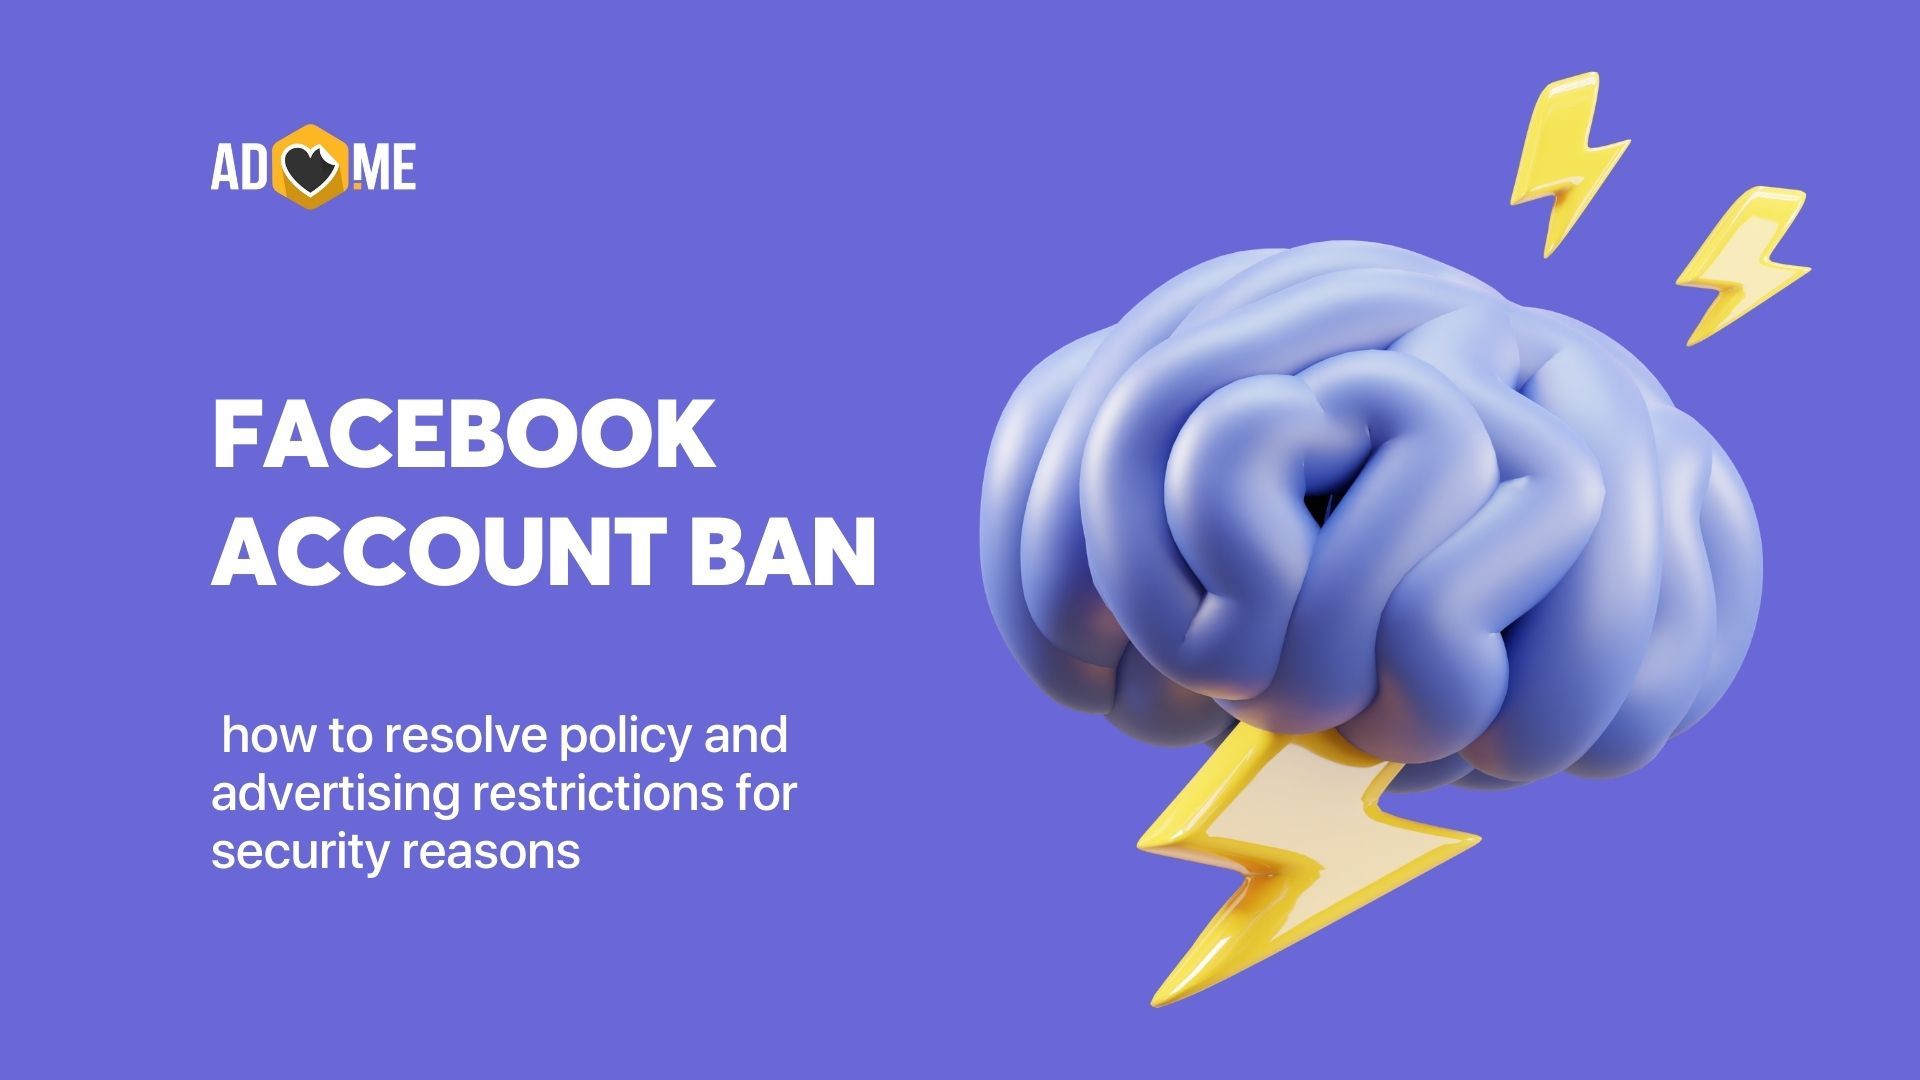 Facebook account ban: how to resolve policy and advertising restrictions for security reasons